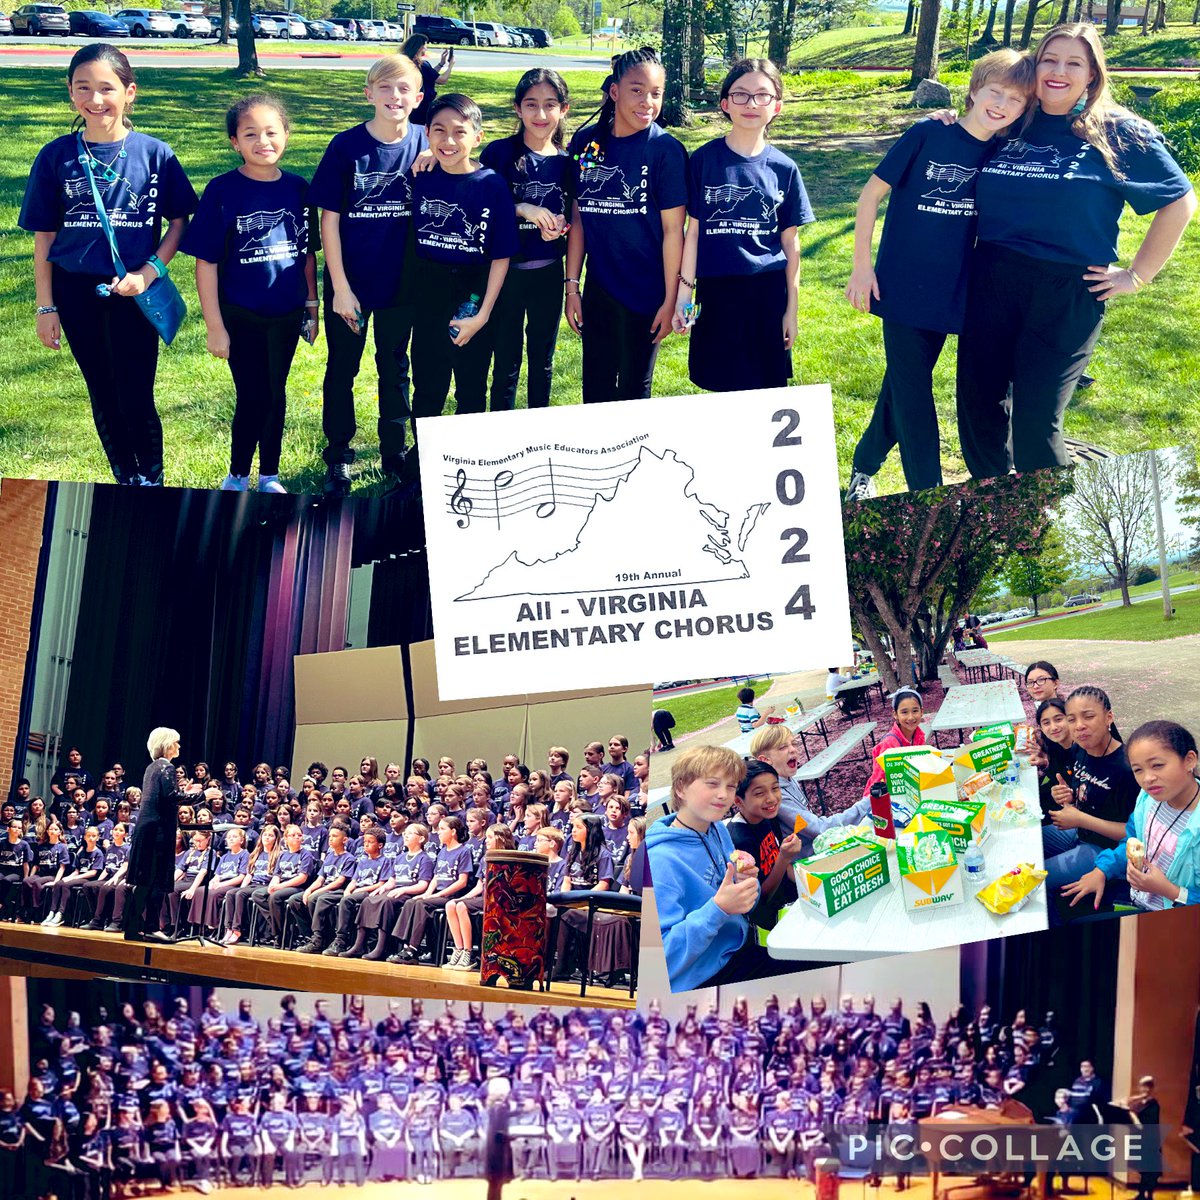 🎶 What an incredible day at the 19th Annual All-Virginia Elementary Chorus! 180 talented singers from 35 schools came together at Spotswood High School in Rockingham County. Tolbert Elementary School students were thrilled to be a part of this unforgettable experience!